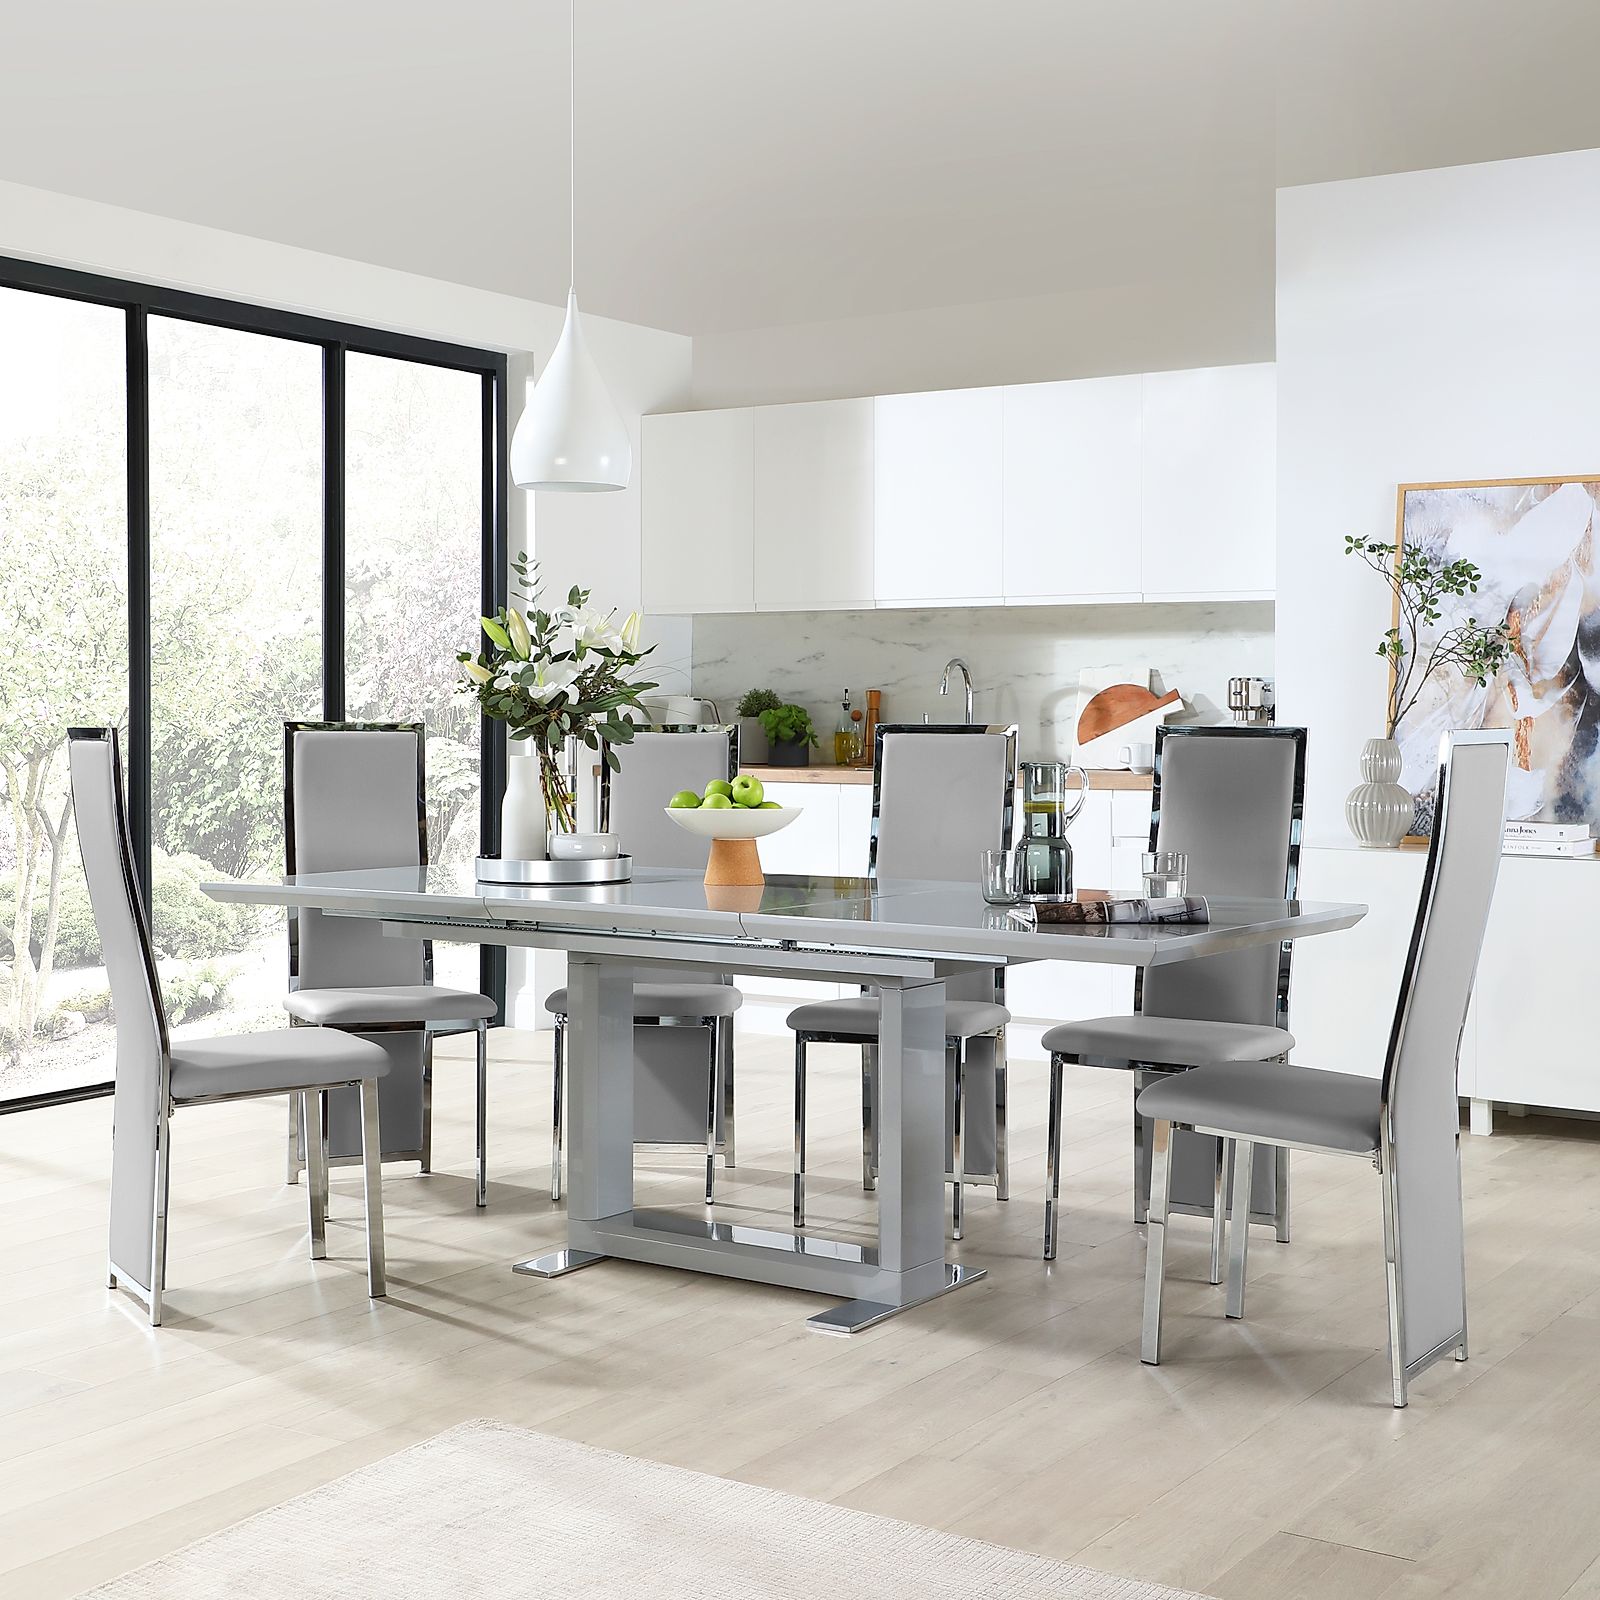 Extending Dining Table And 8 Chairs Uker : Signature Grey Painted ...